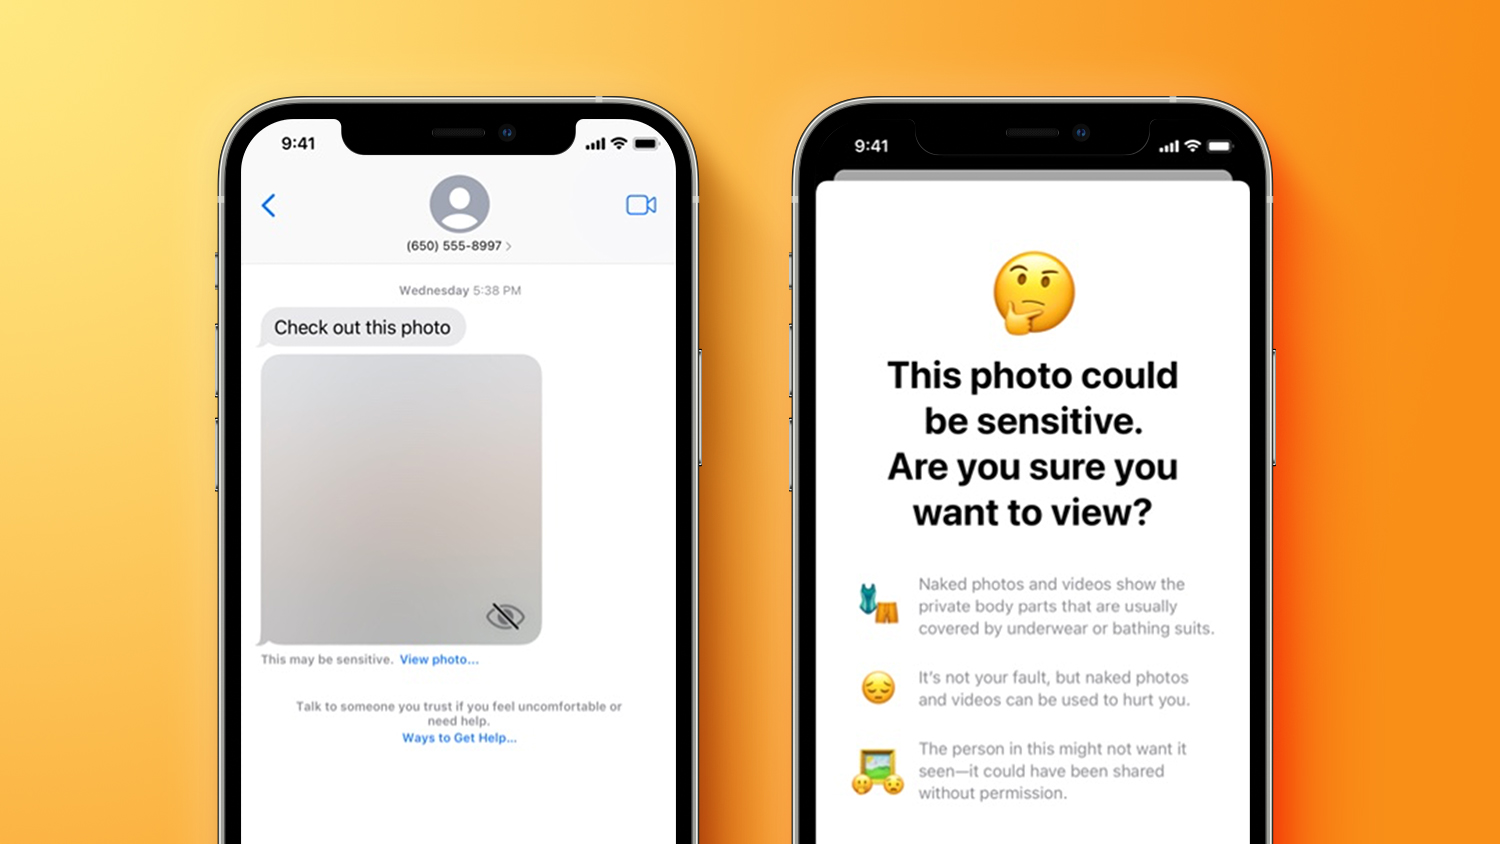 Apple’s Messages Communication Safety Feature for Kids Expanding to the UK